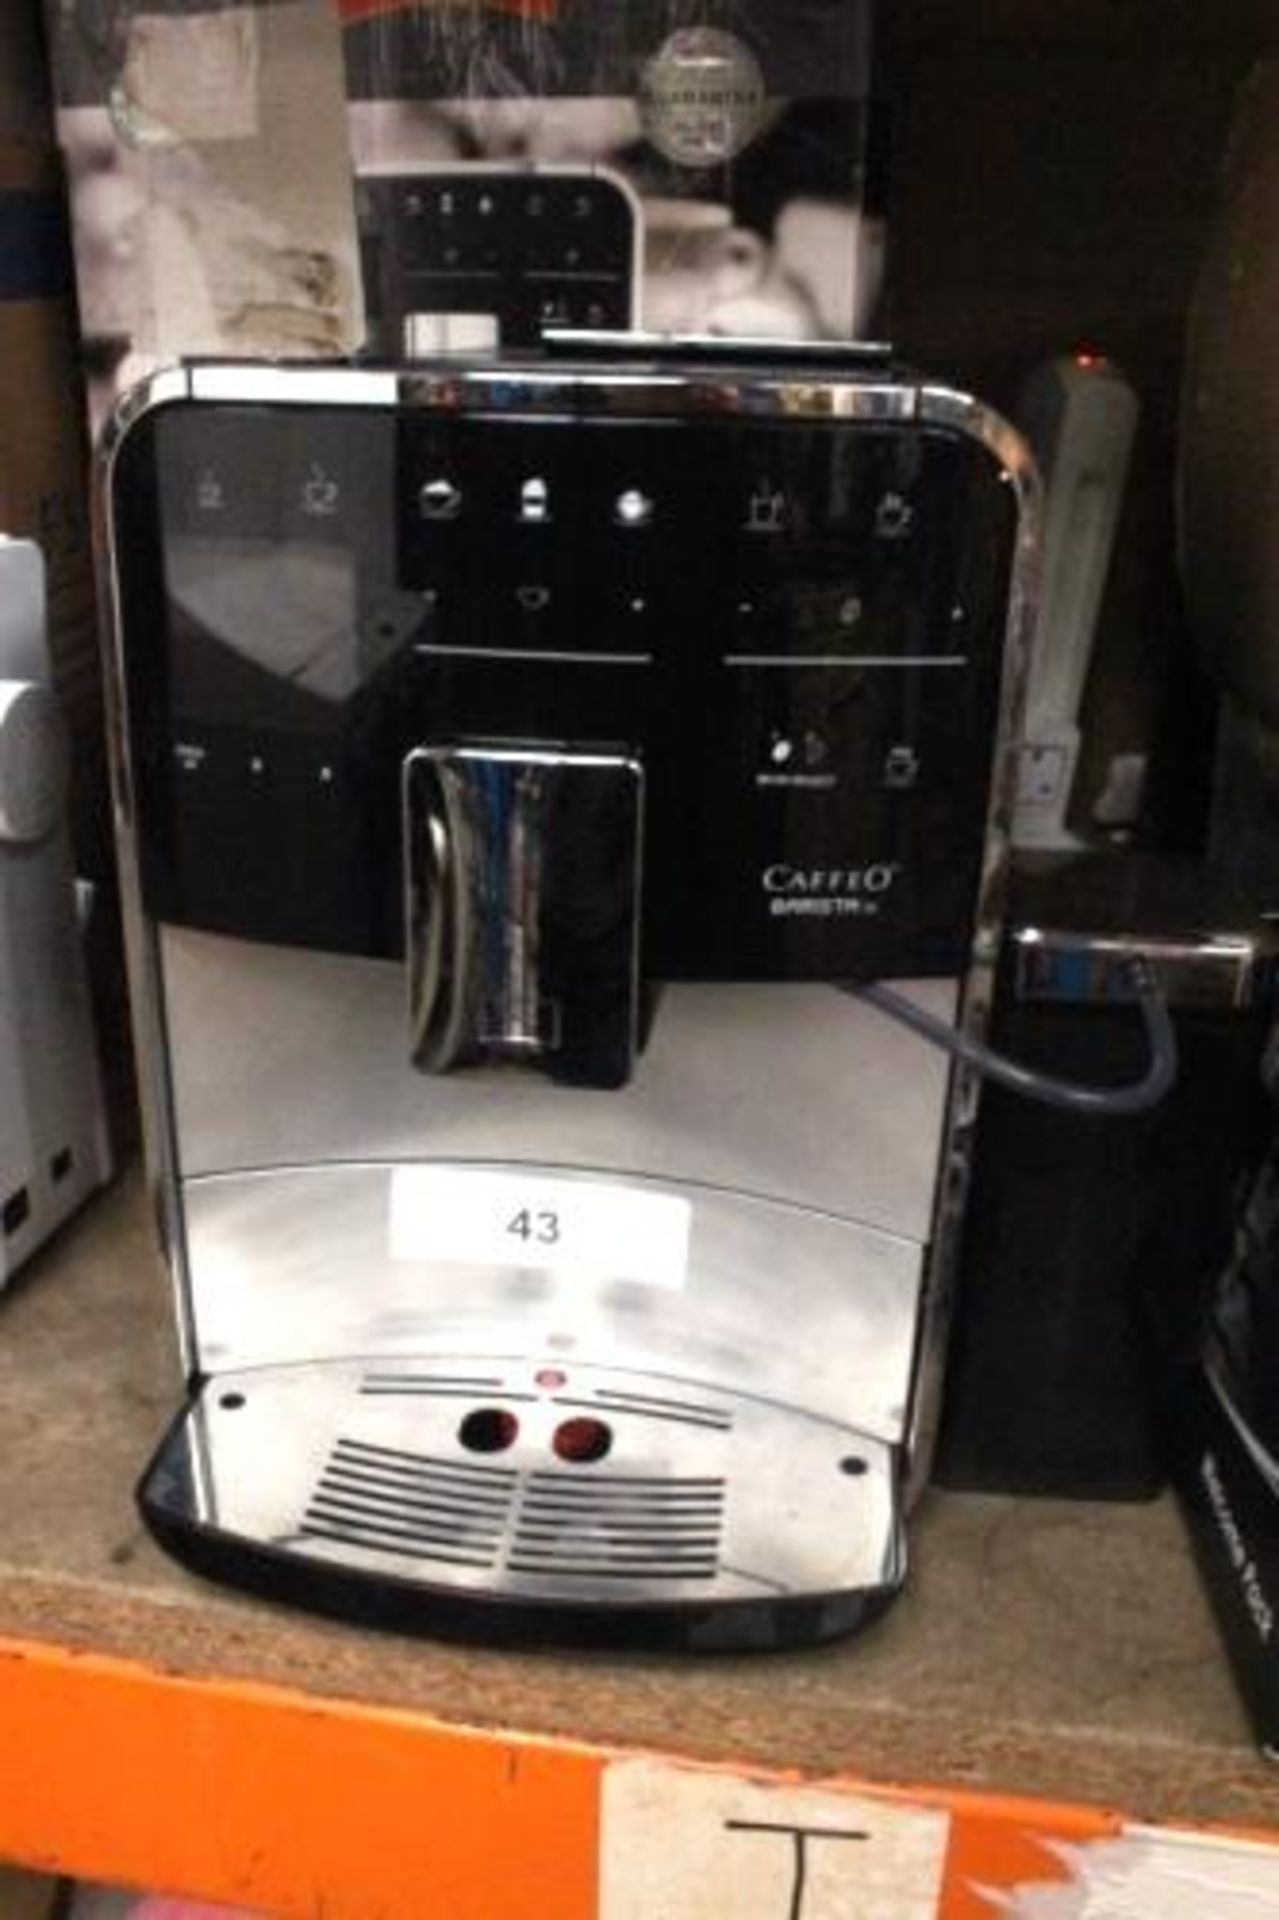 A Caffeo Barista Bean to Cup coffee machine, untested - Spares and repairs (esb2)